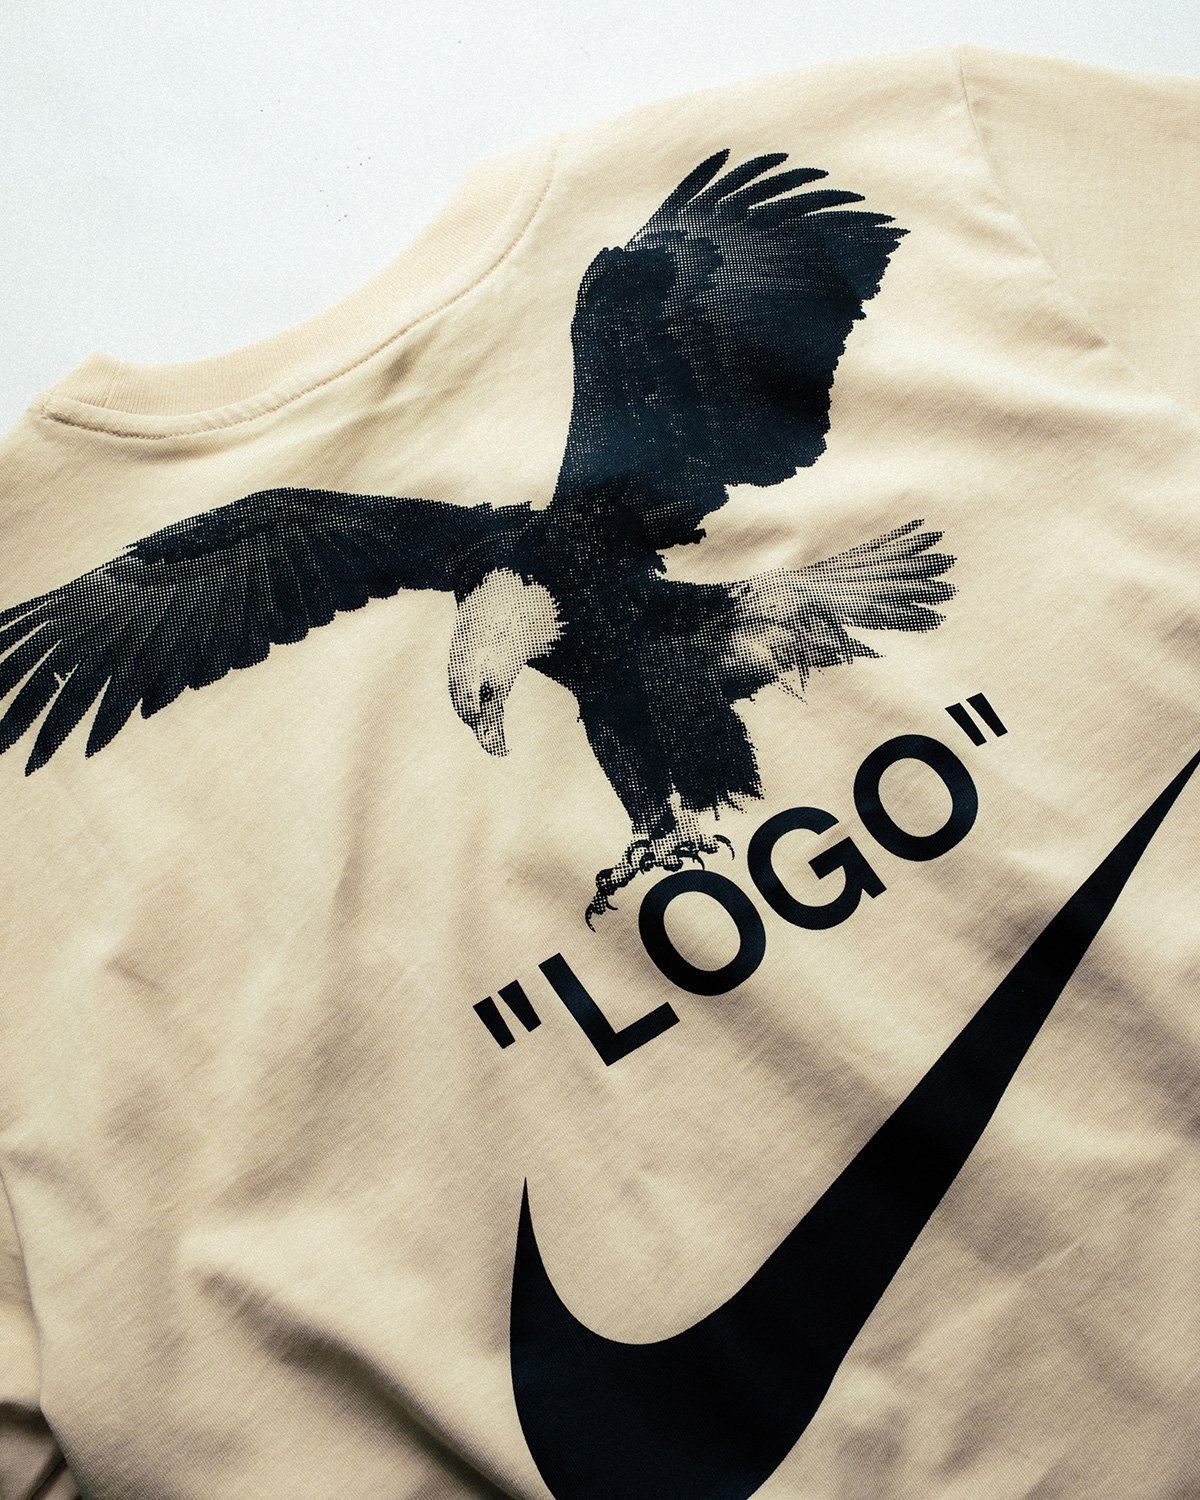 atmos USA on X: "Nike x Off-White Tee is available in-store. The tee featured faux tux screen print “LOGO” and Swoosh branding on front and eagle with “LOGO”